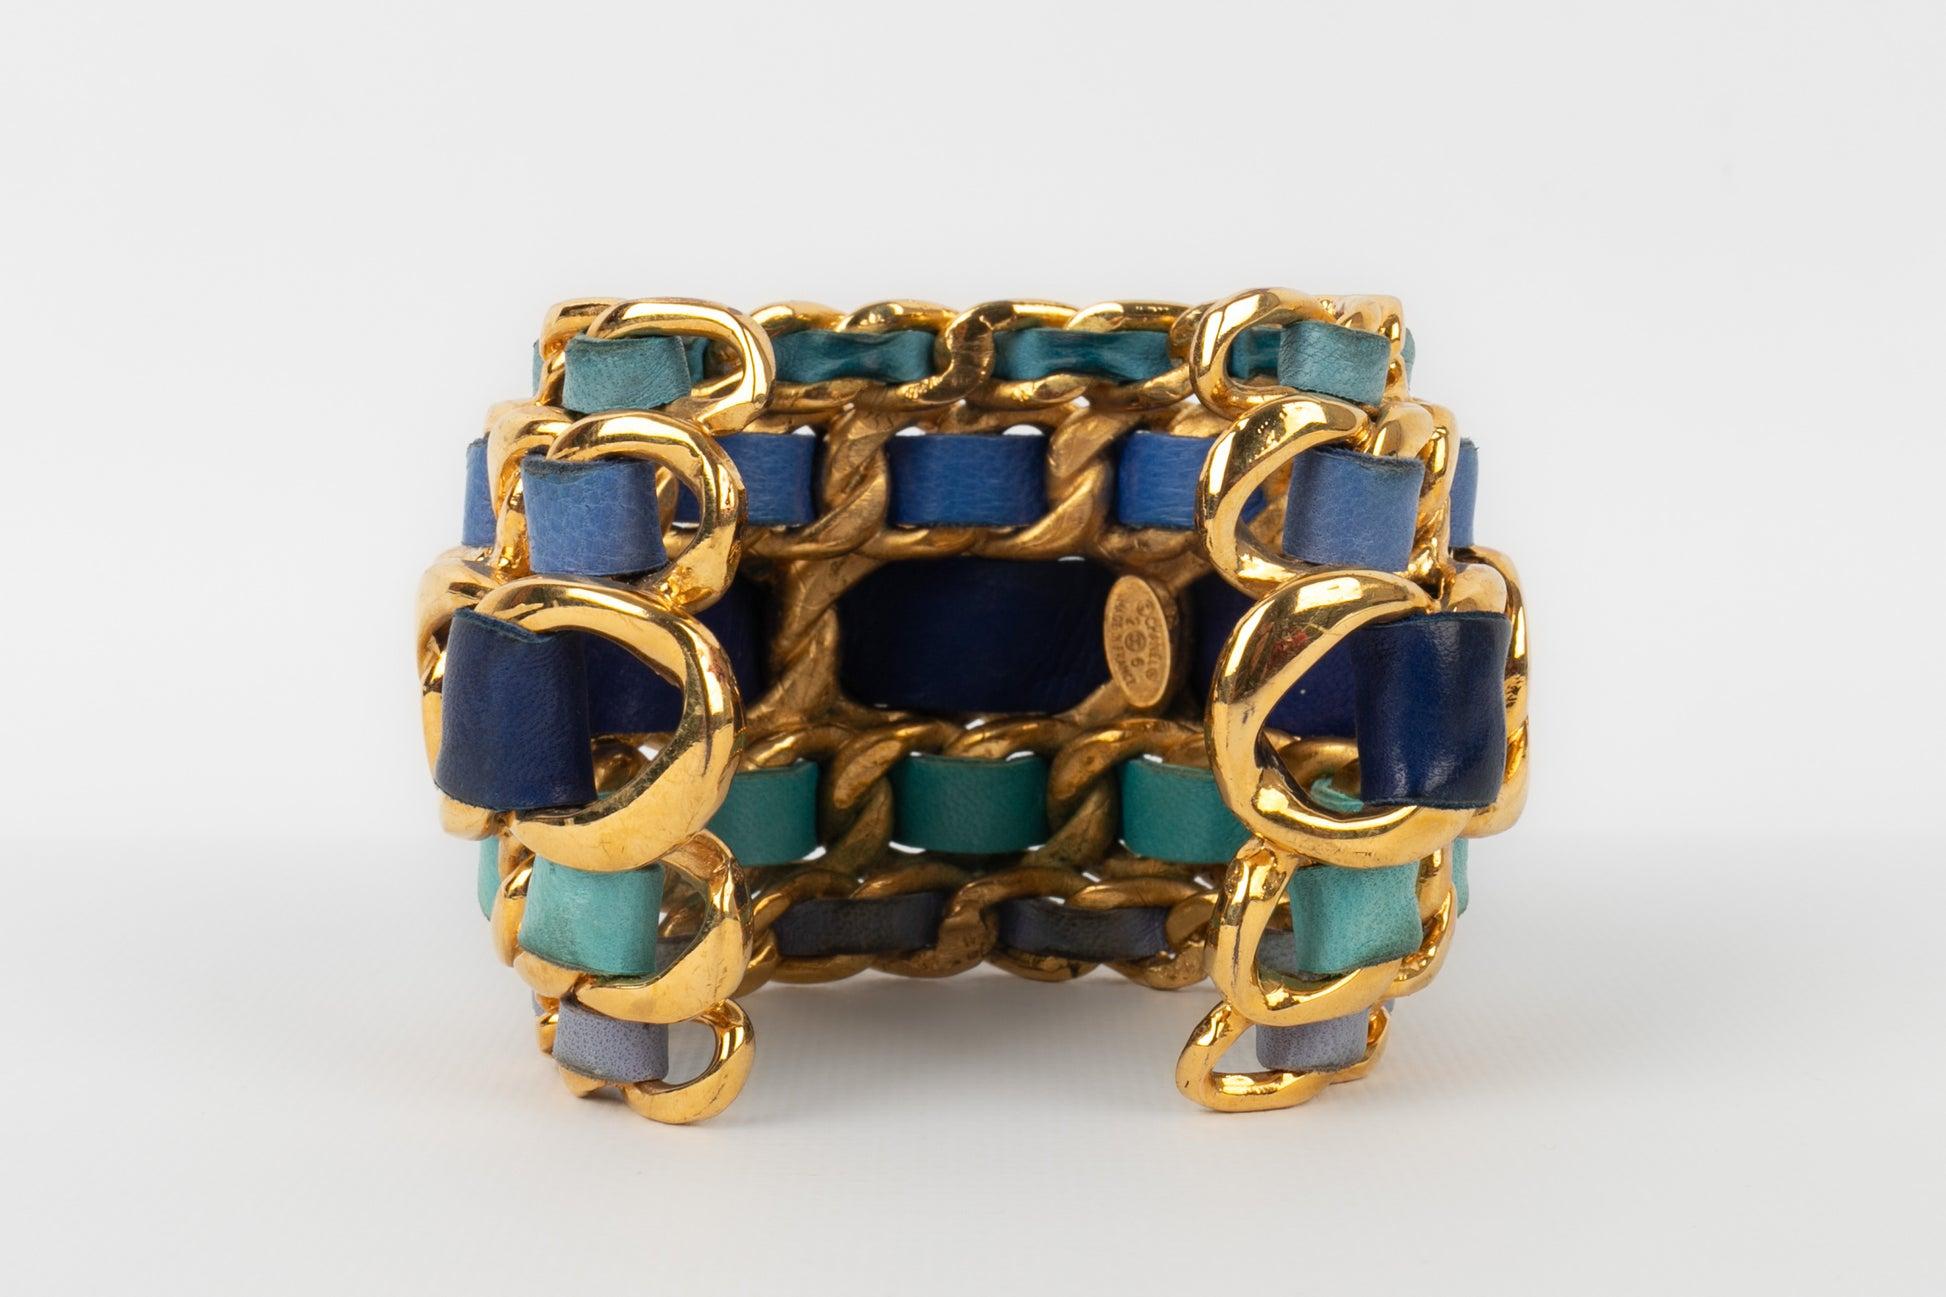 Women's Chanel Cuff Bracelet in Golden Metal Interlaced with Blue Tone Leather, 1991 For Sale